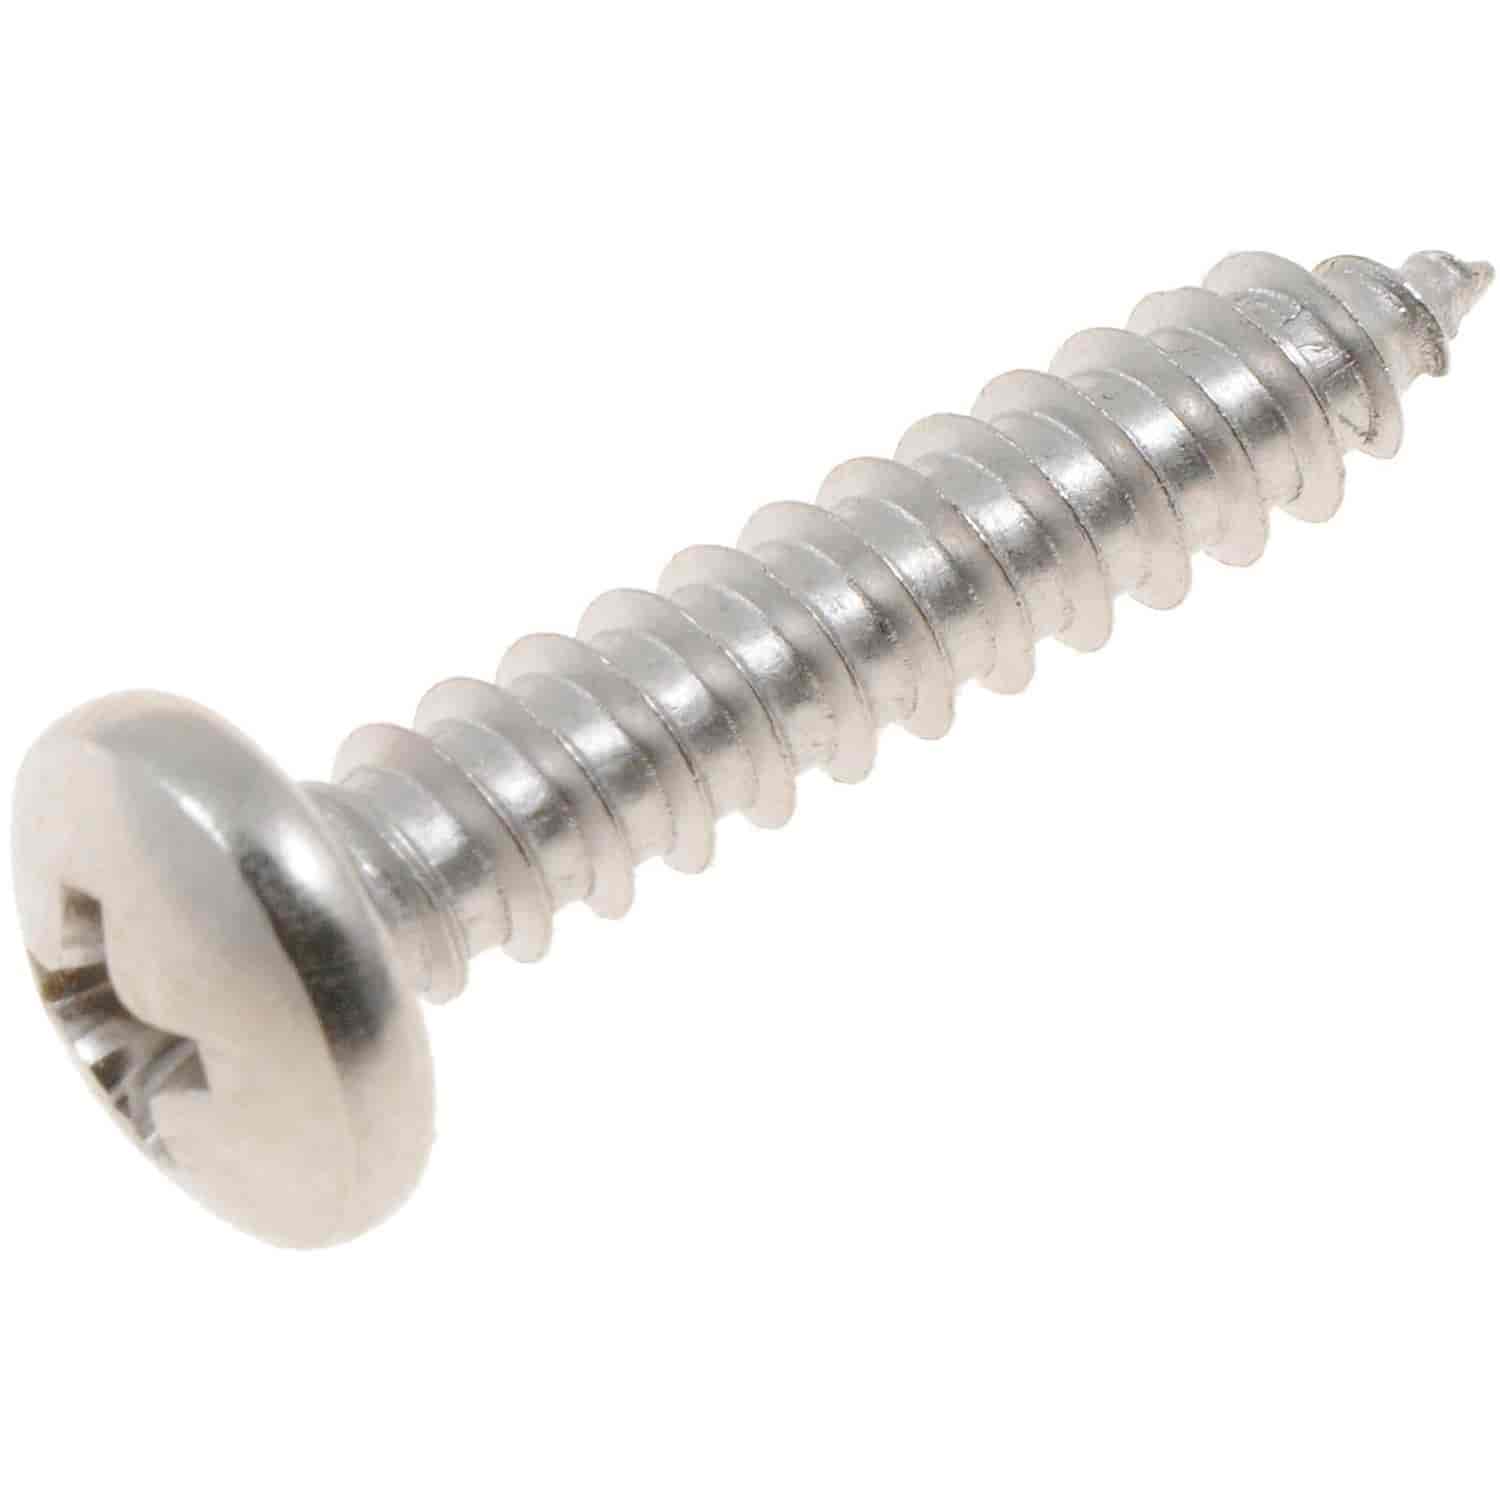 Self Tapping Screw-Stainless Steel-Pan Phillips Head-No. 10 x 1 In.